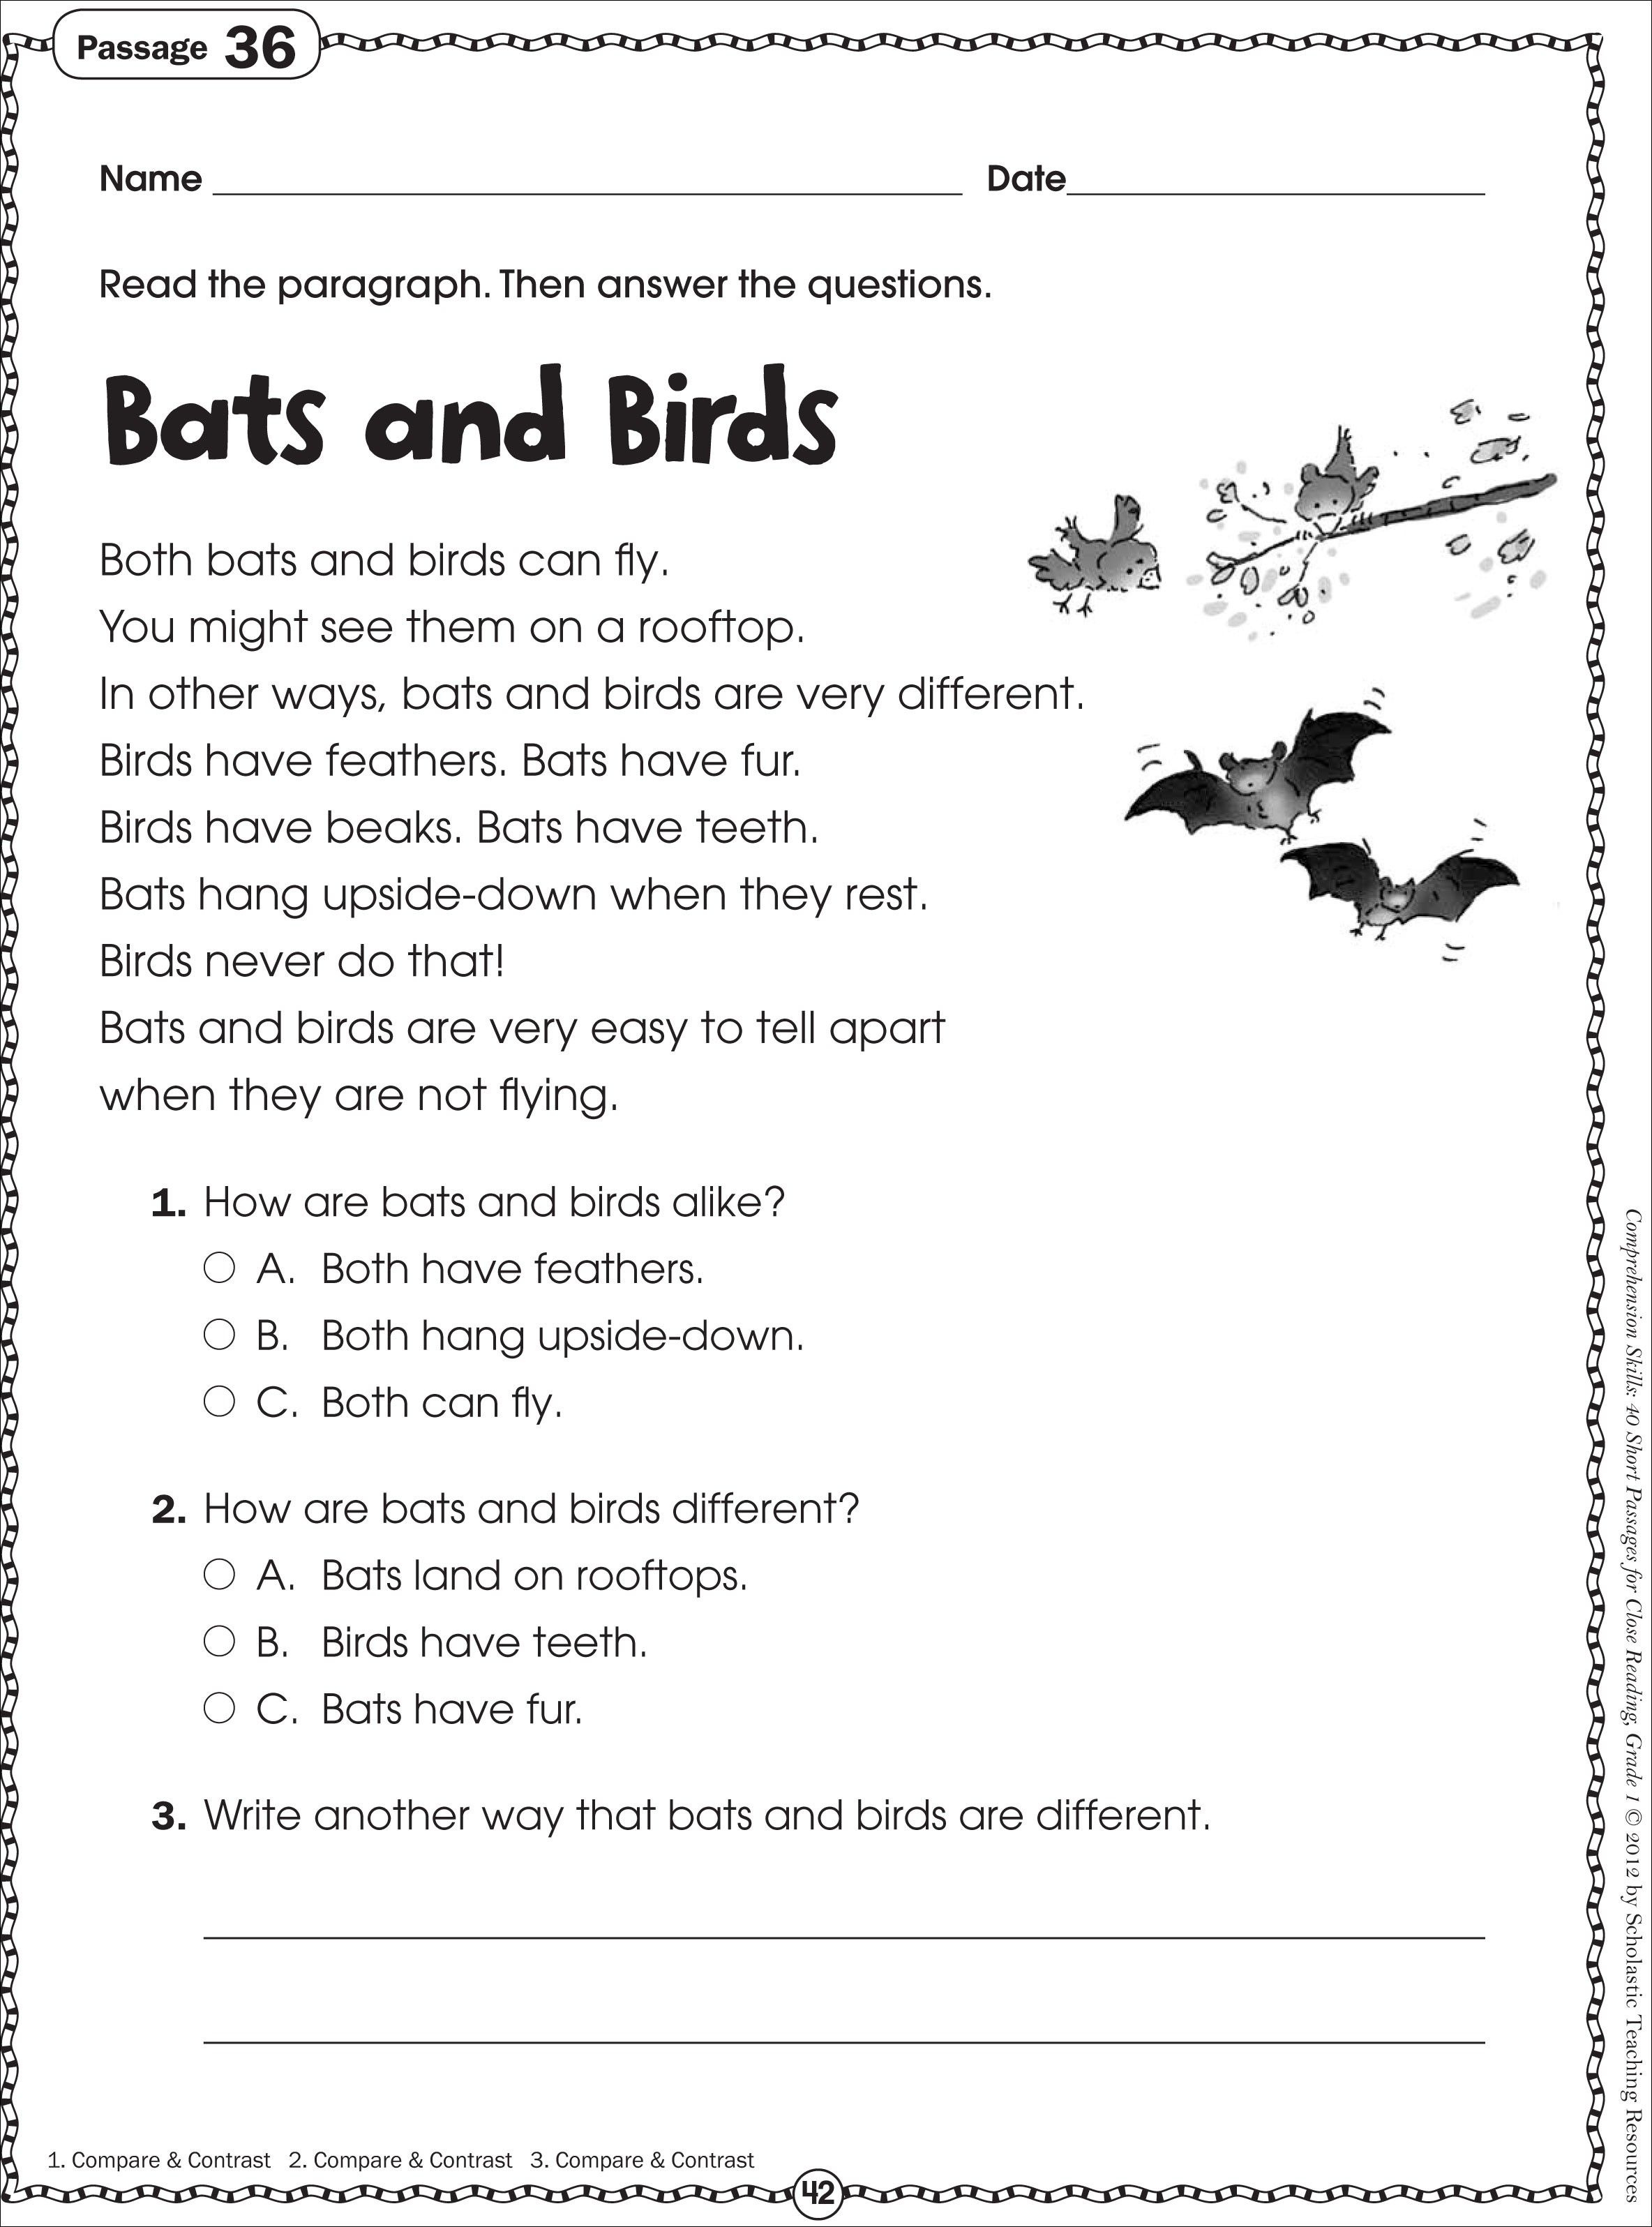 Free Printable Reading Comprehension Worksheets For Kindergarten - Free Printable Short Stories With Comprehension Questions